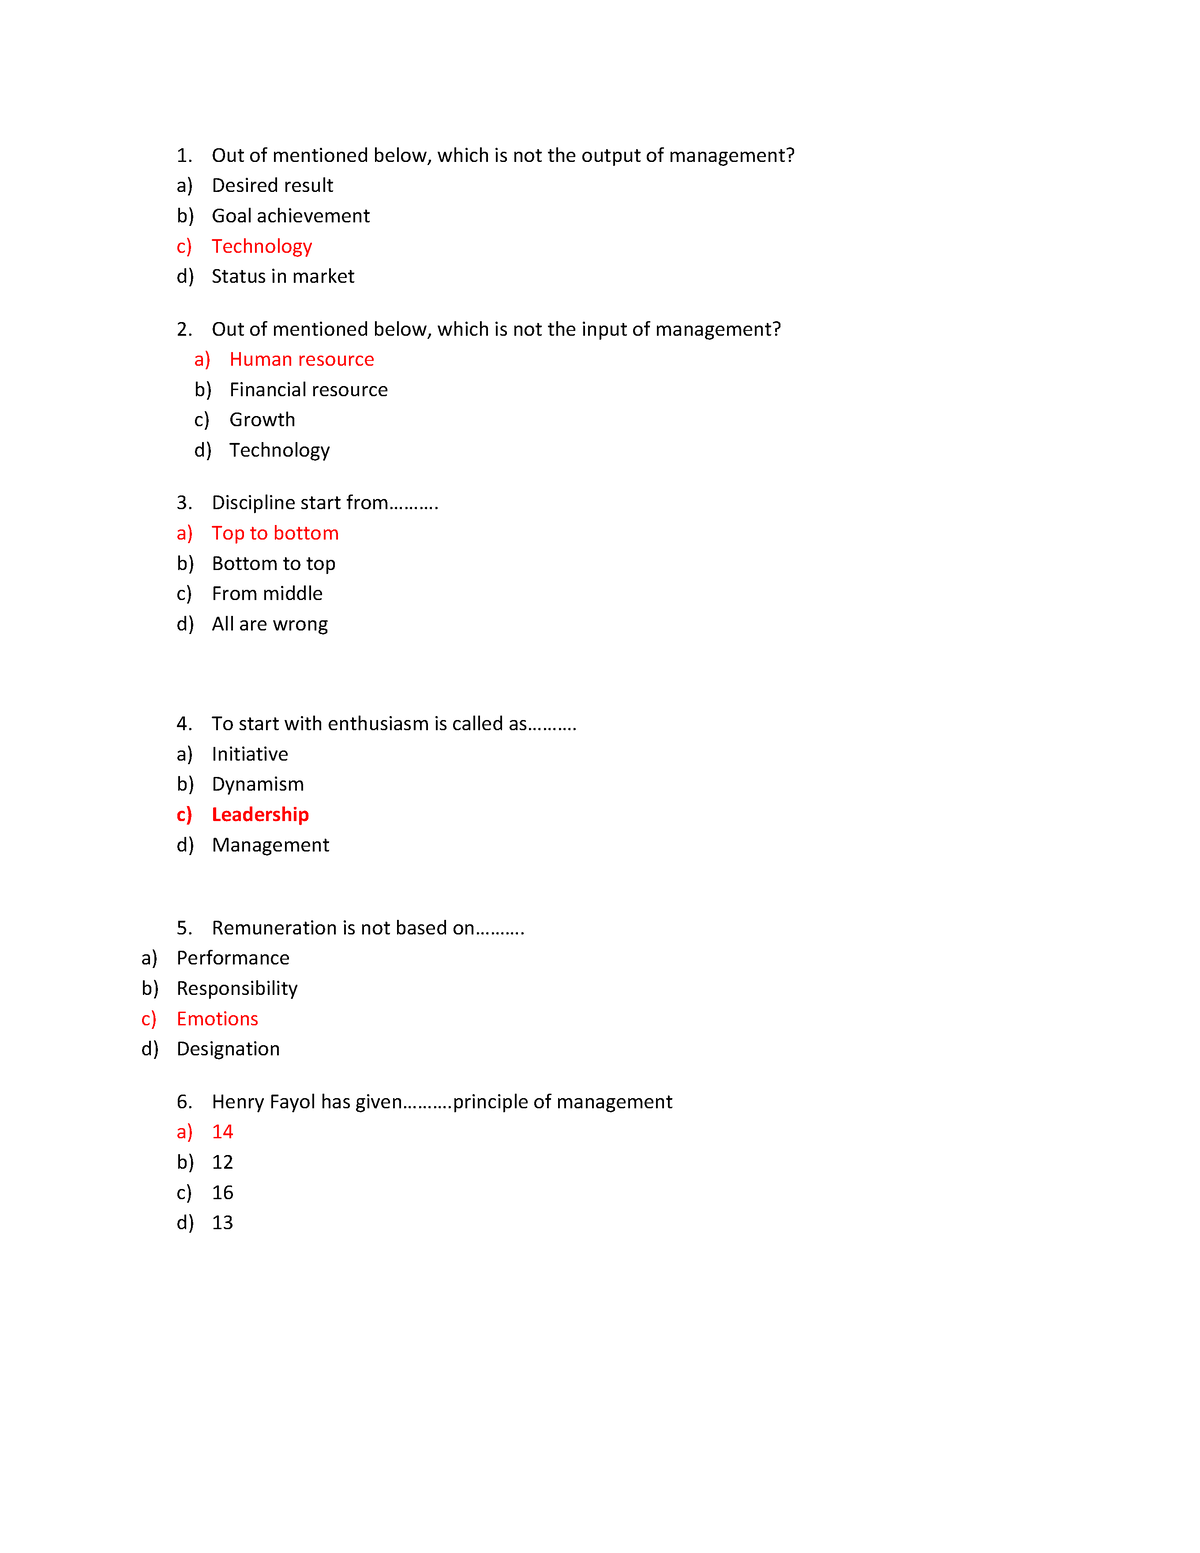 MCQ test MNG 1 - Lecture notes 1 - Out of mentioned below, which is not ...